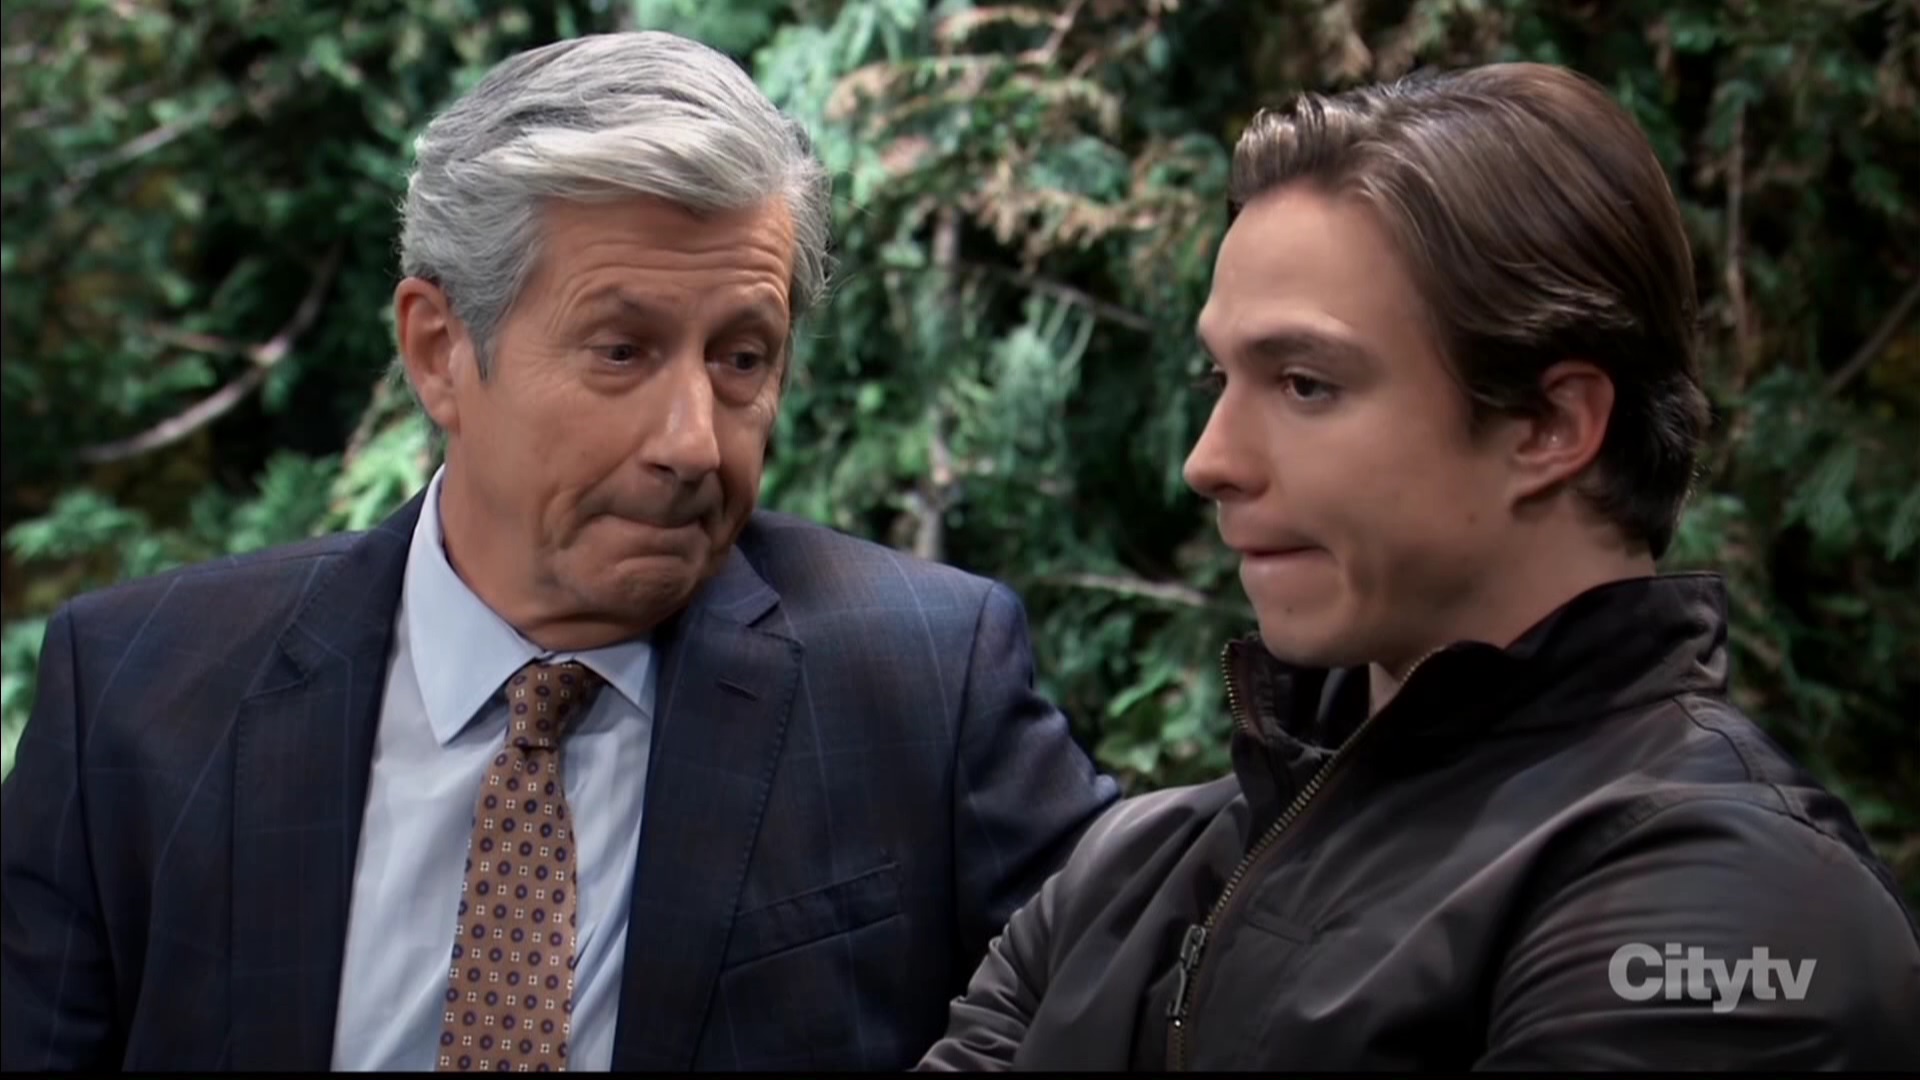 victor tells spencer his options